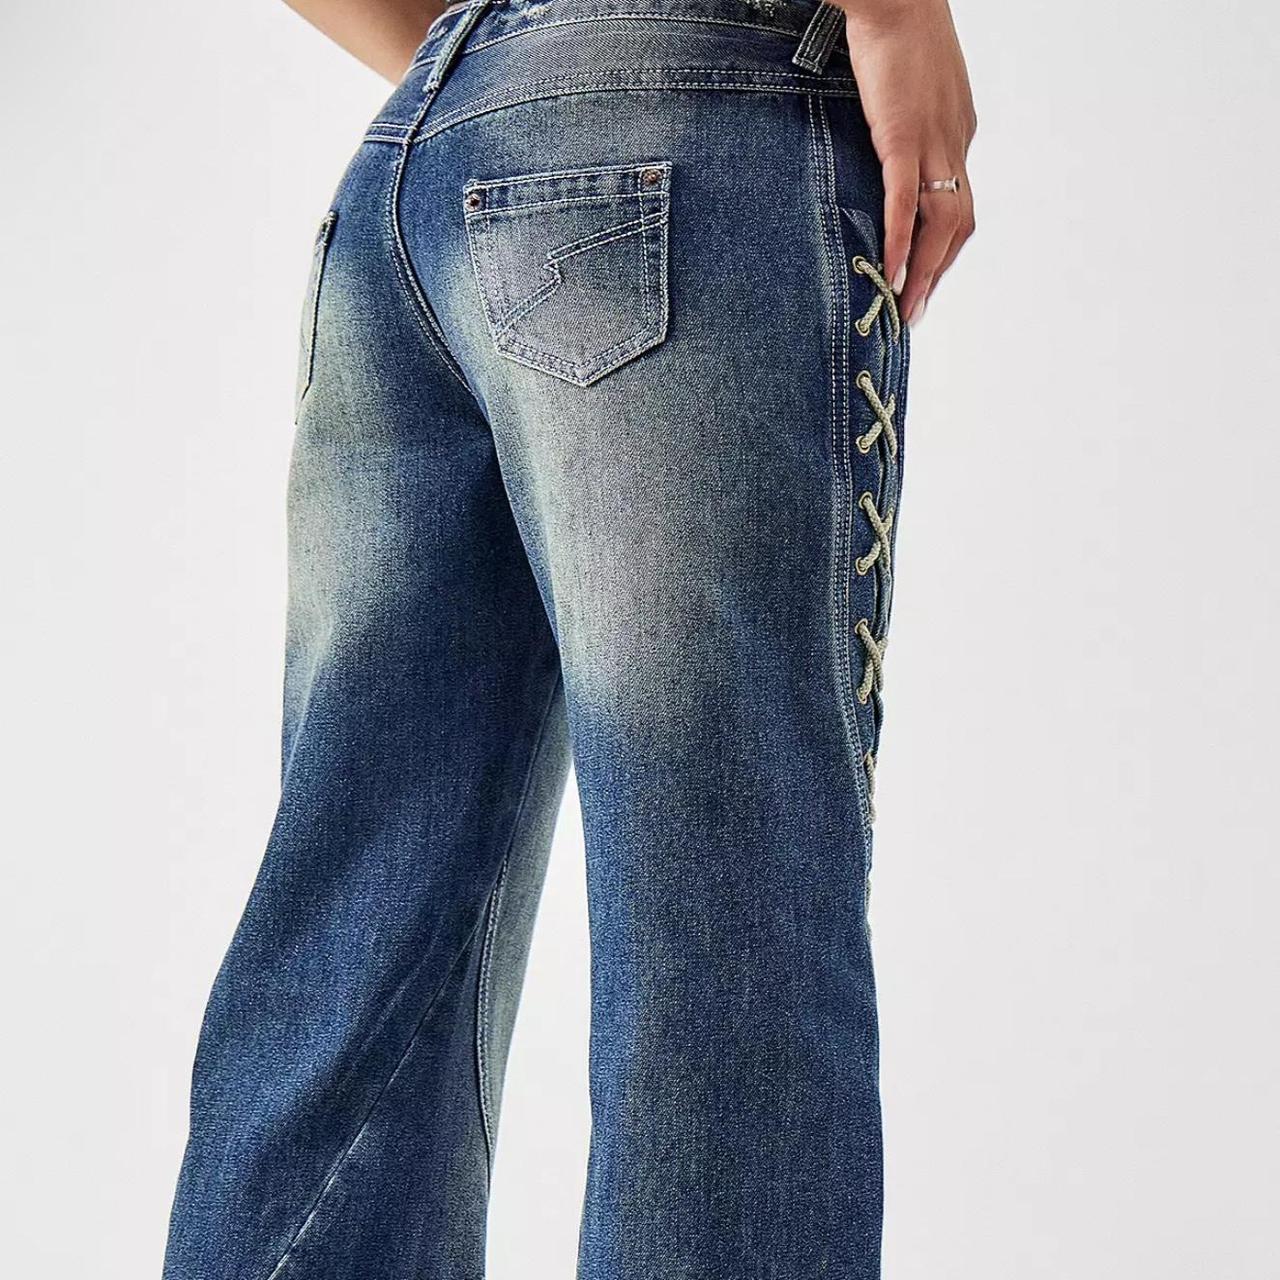 The Kript Veda Jeans